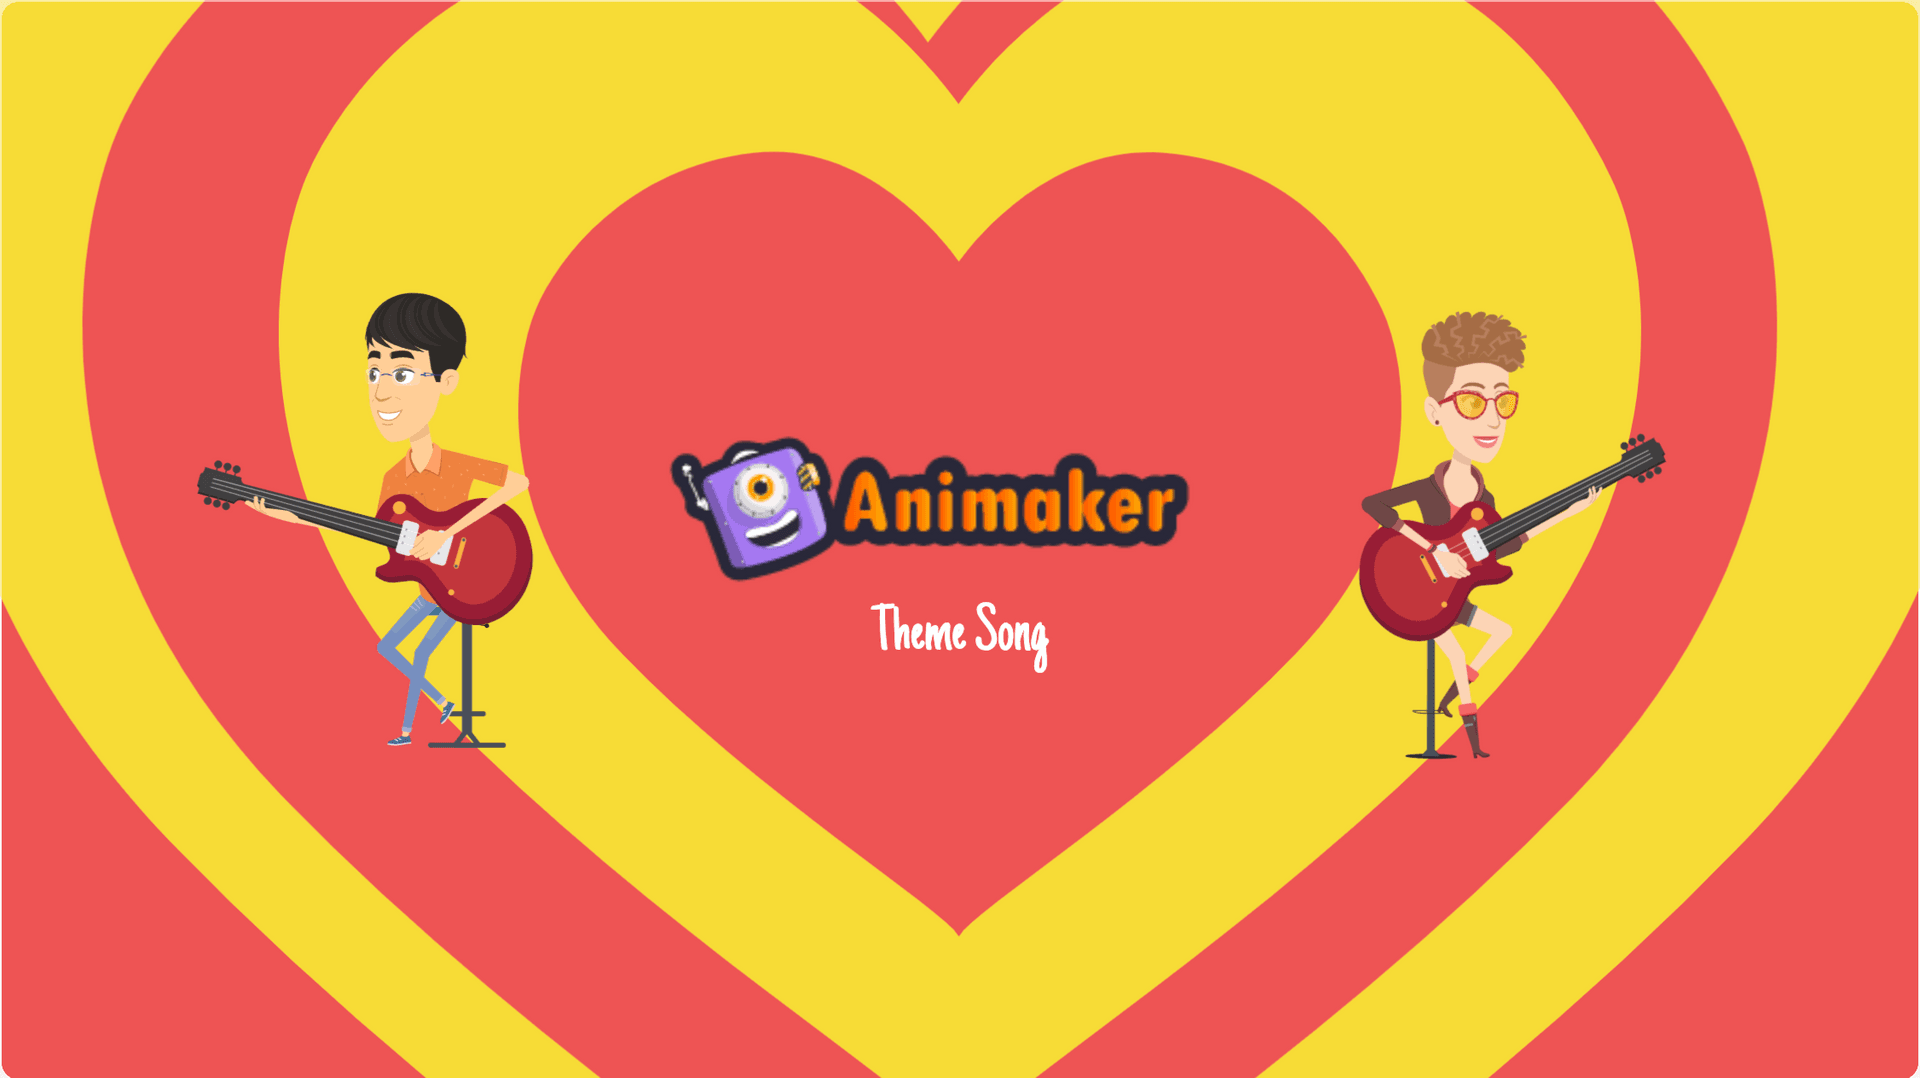 the-animaker-theme-song-video-template-thumbnail-img